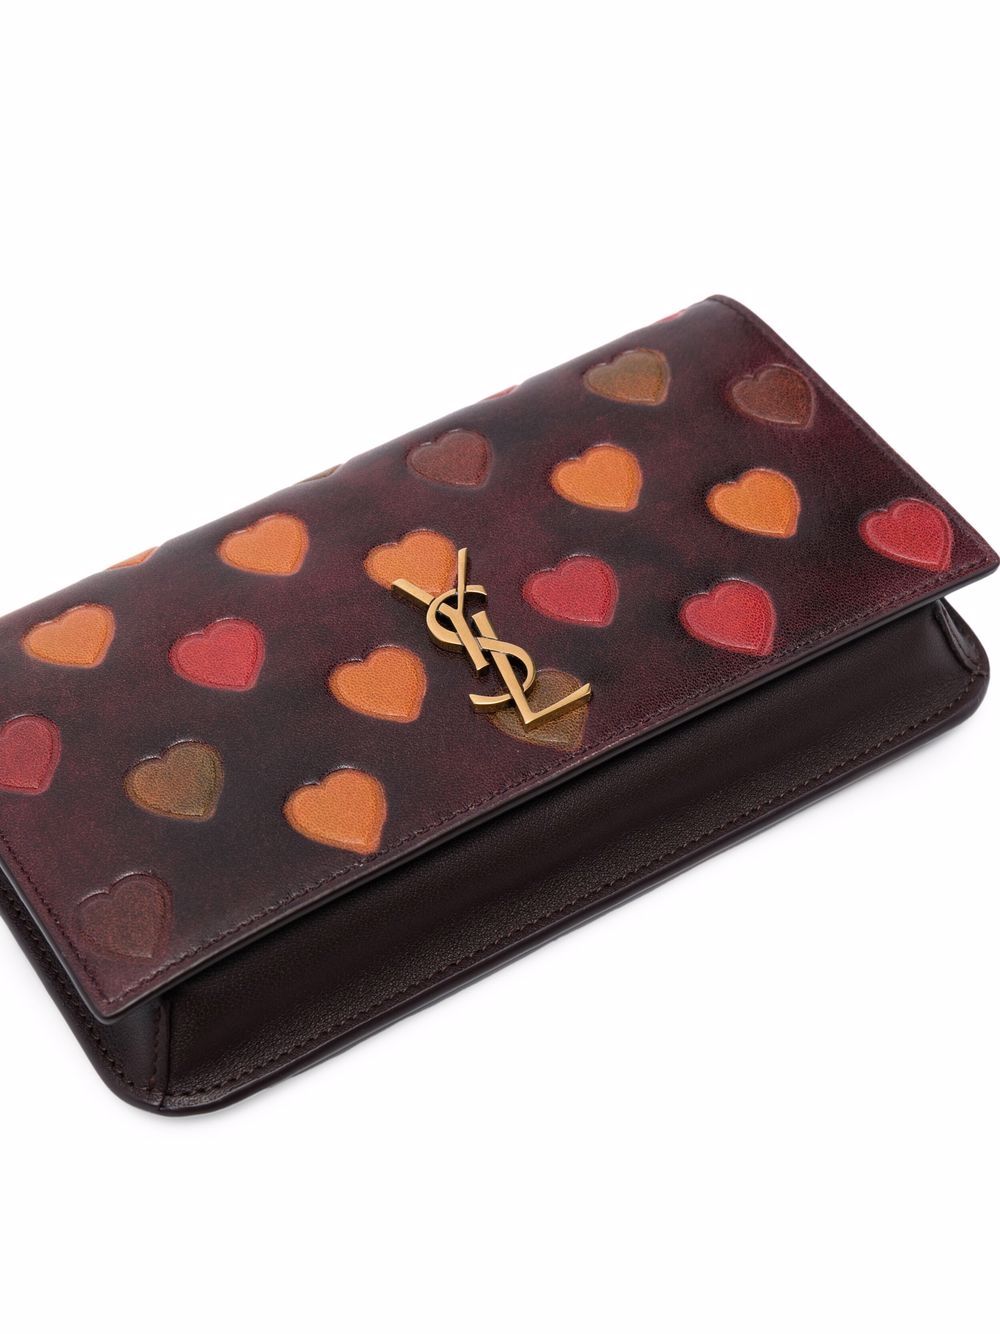 Saint Laurent Black Monogram Small Wallet With Red Heart